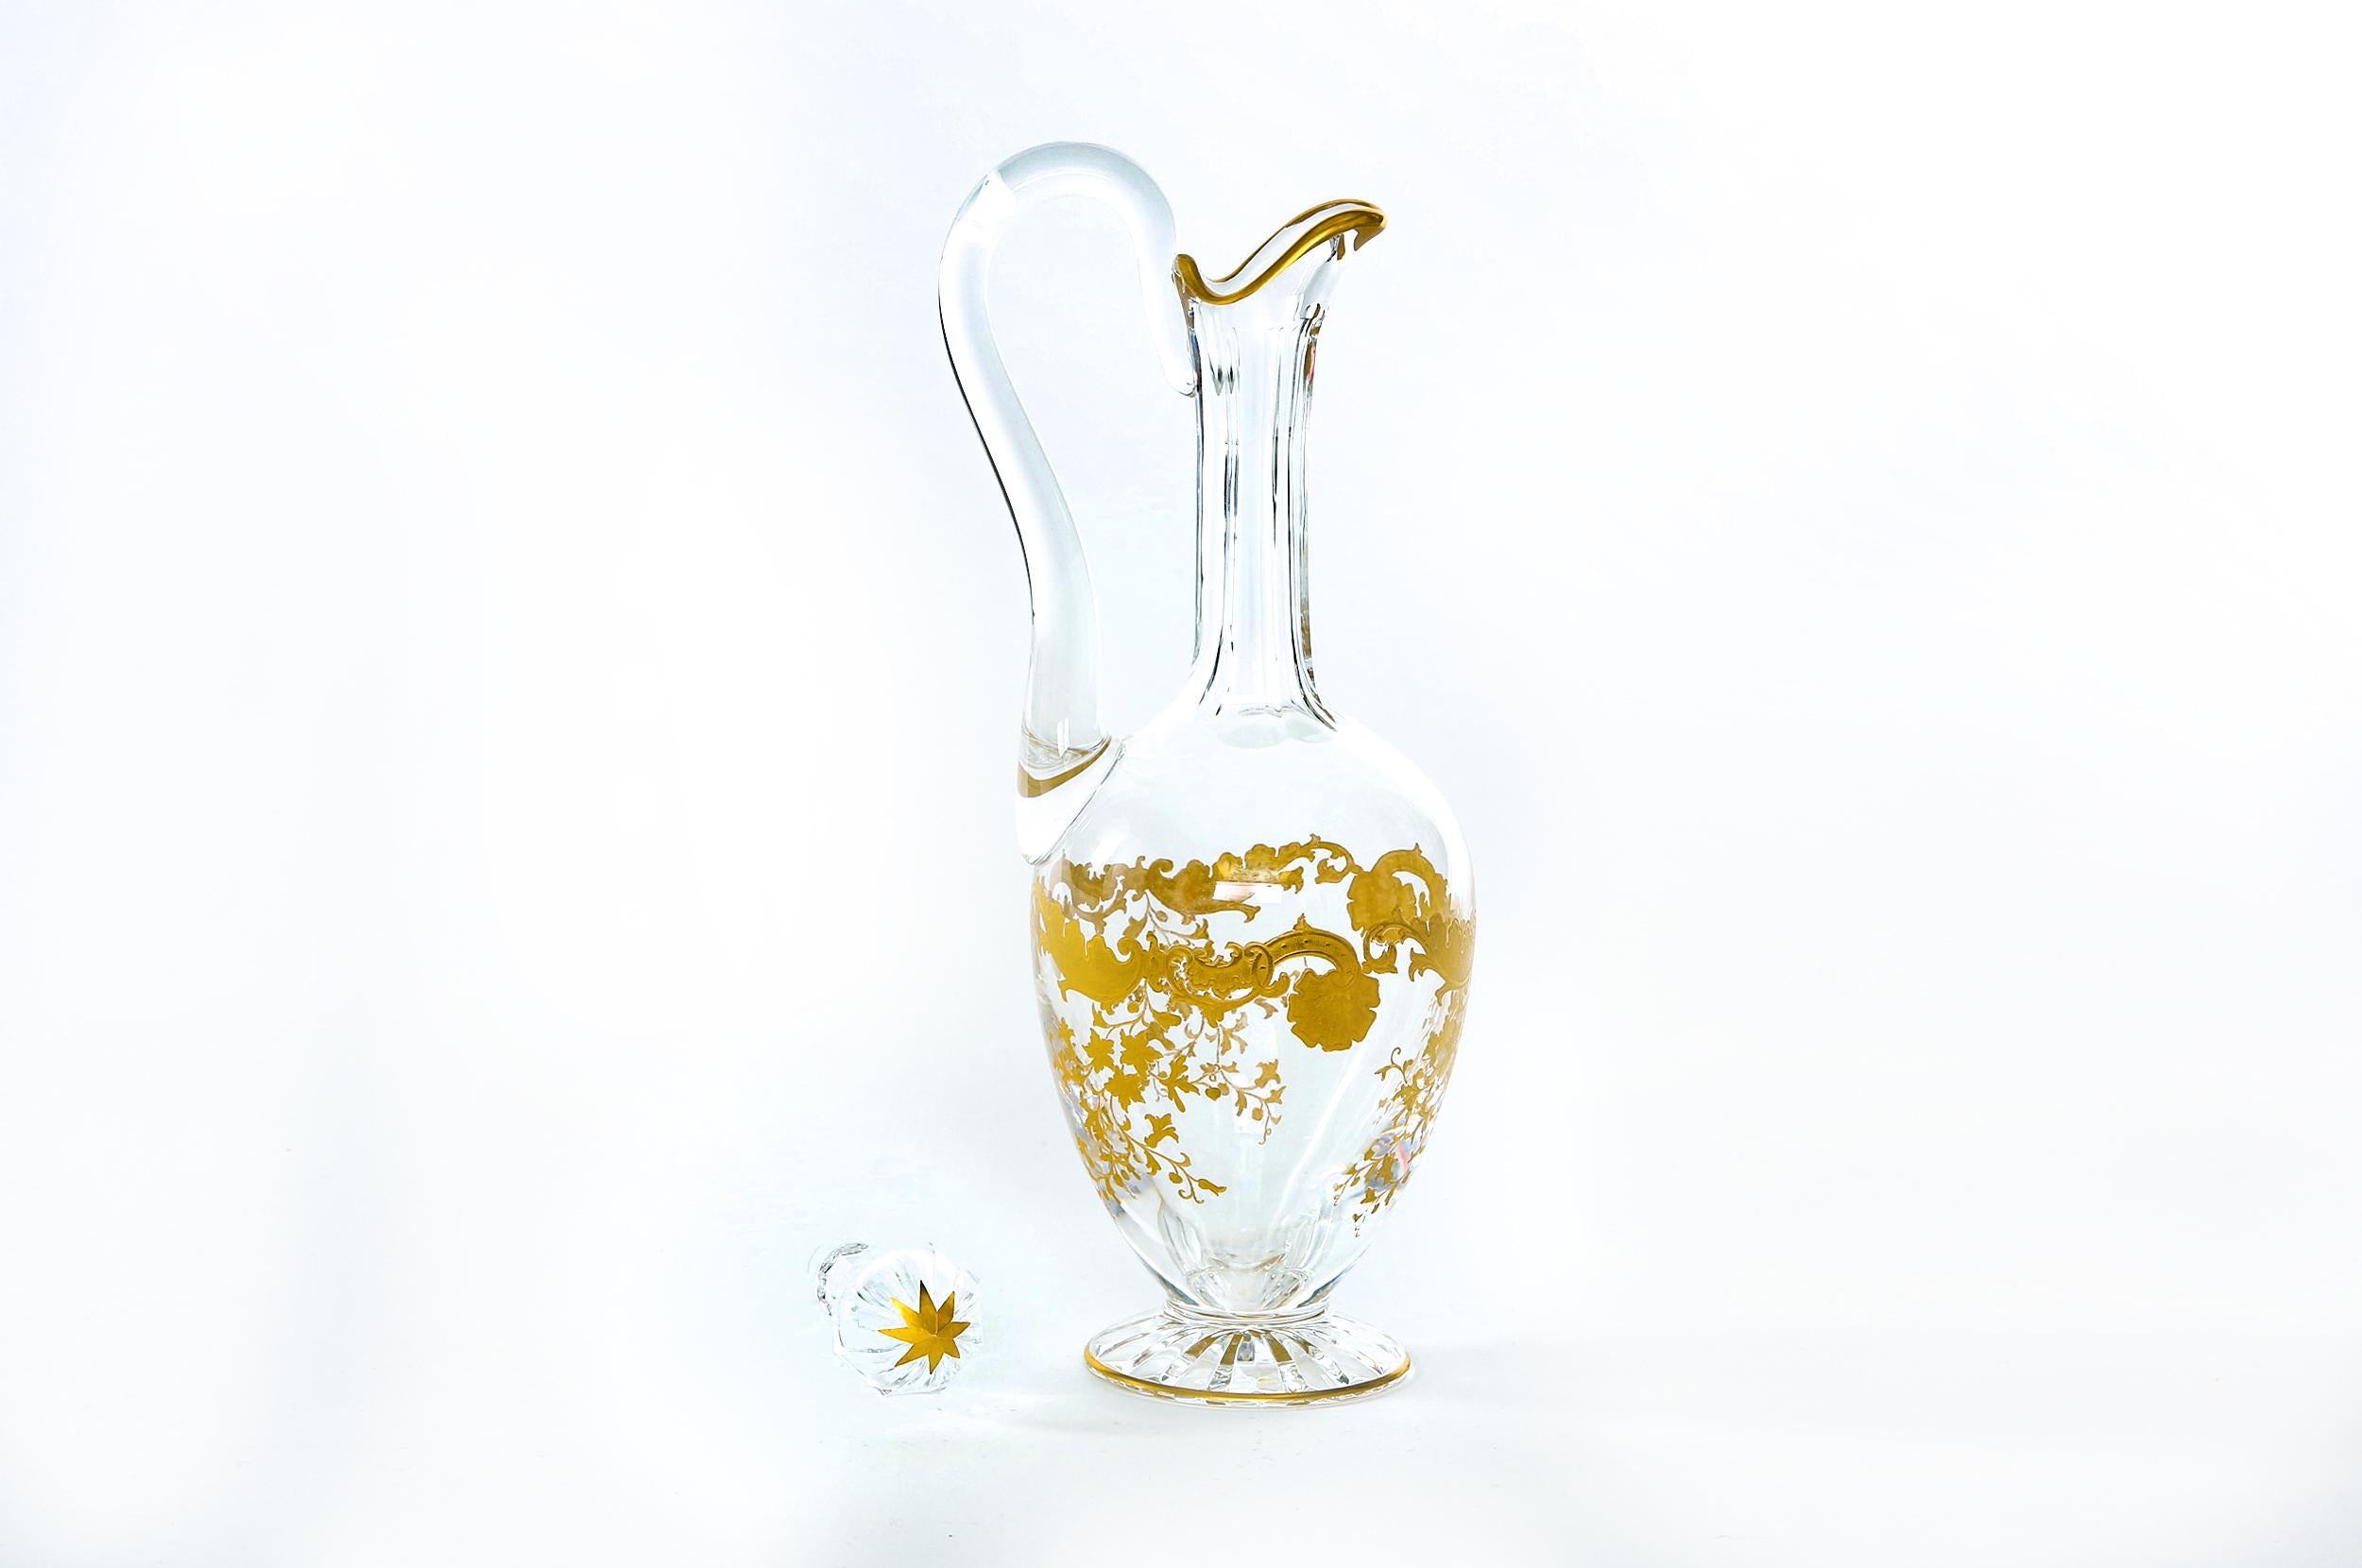 Mid-20th century Saint Louis crystal with gold design details tableware or barware decanter. The decanter is in great condition. Maker's mark stamped undersigned. It stands about 15 inches tall x 5 inches diameter.